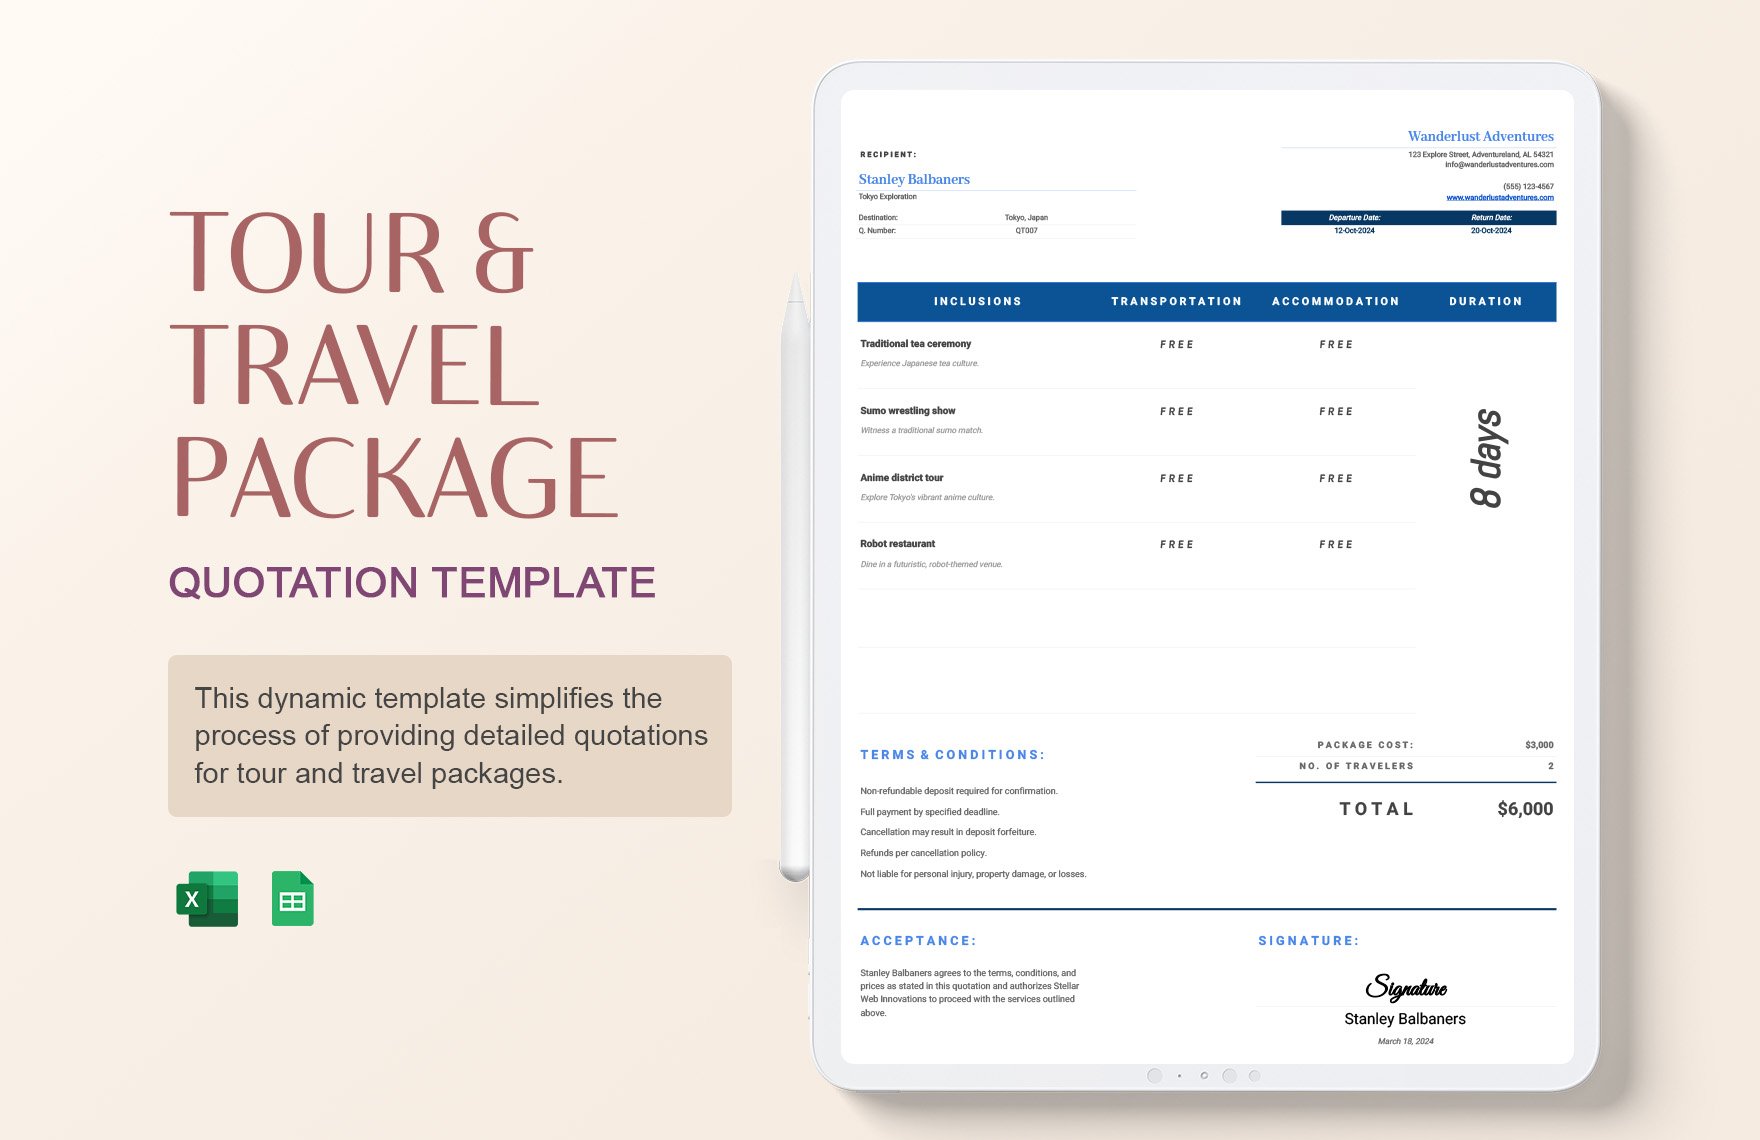 Tour & Travel Package Quotation Template